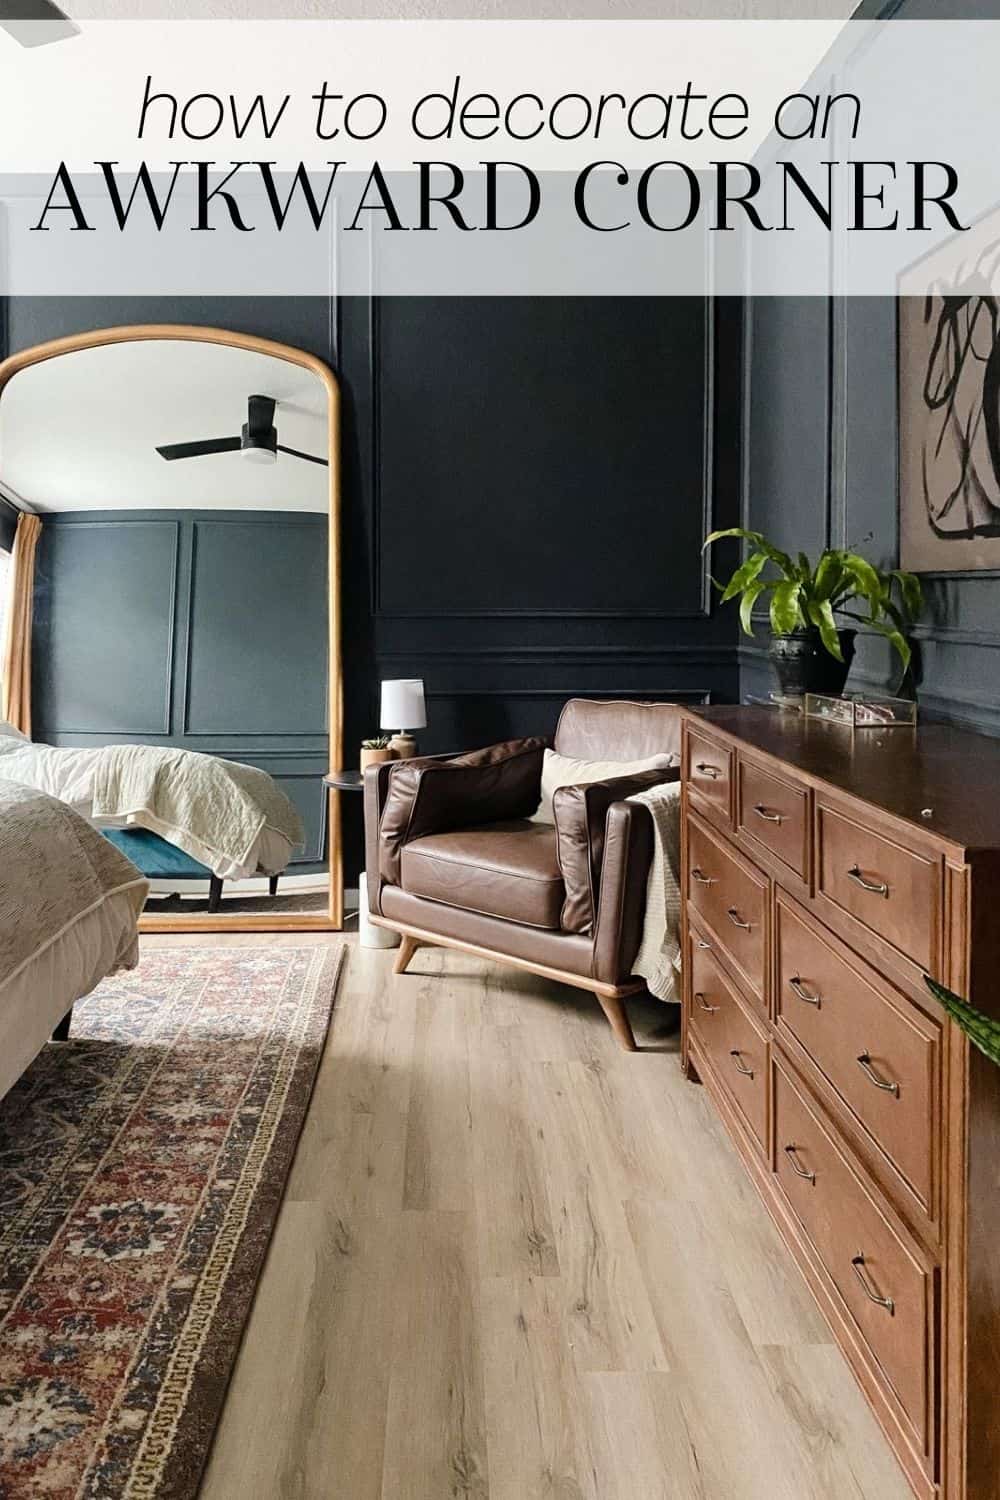 a bedroom with dark walls and a cozy armchair. Text overlay says "how to decorate an awkward corner"